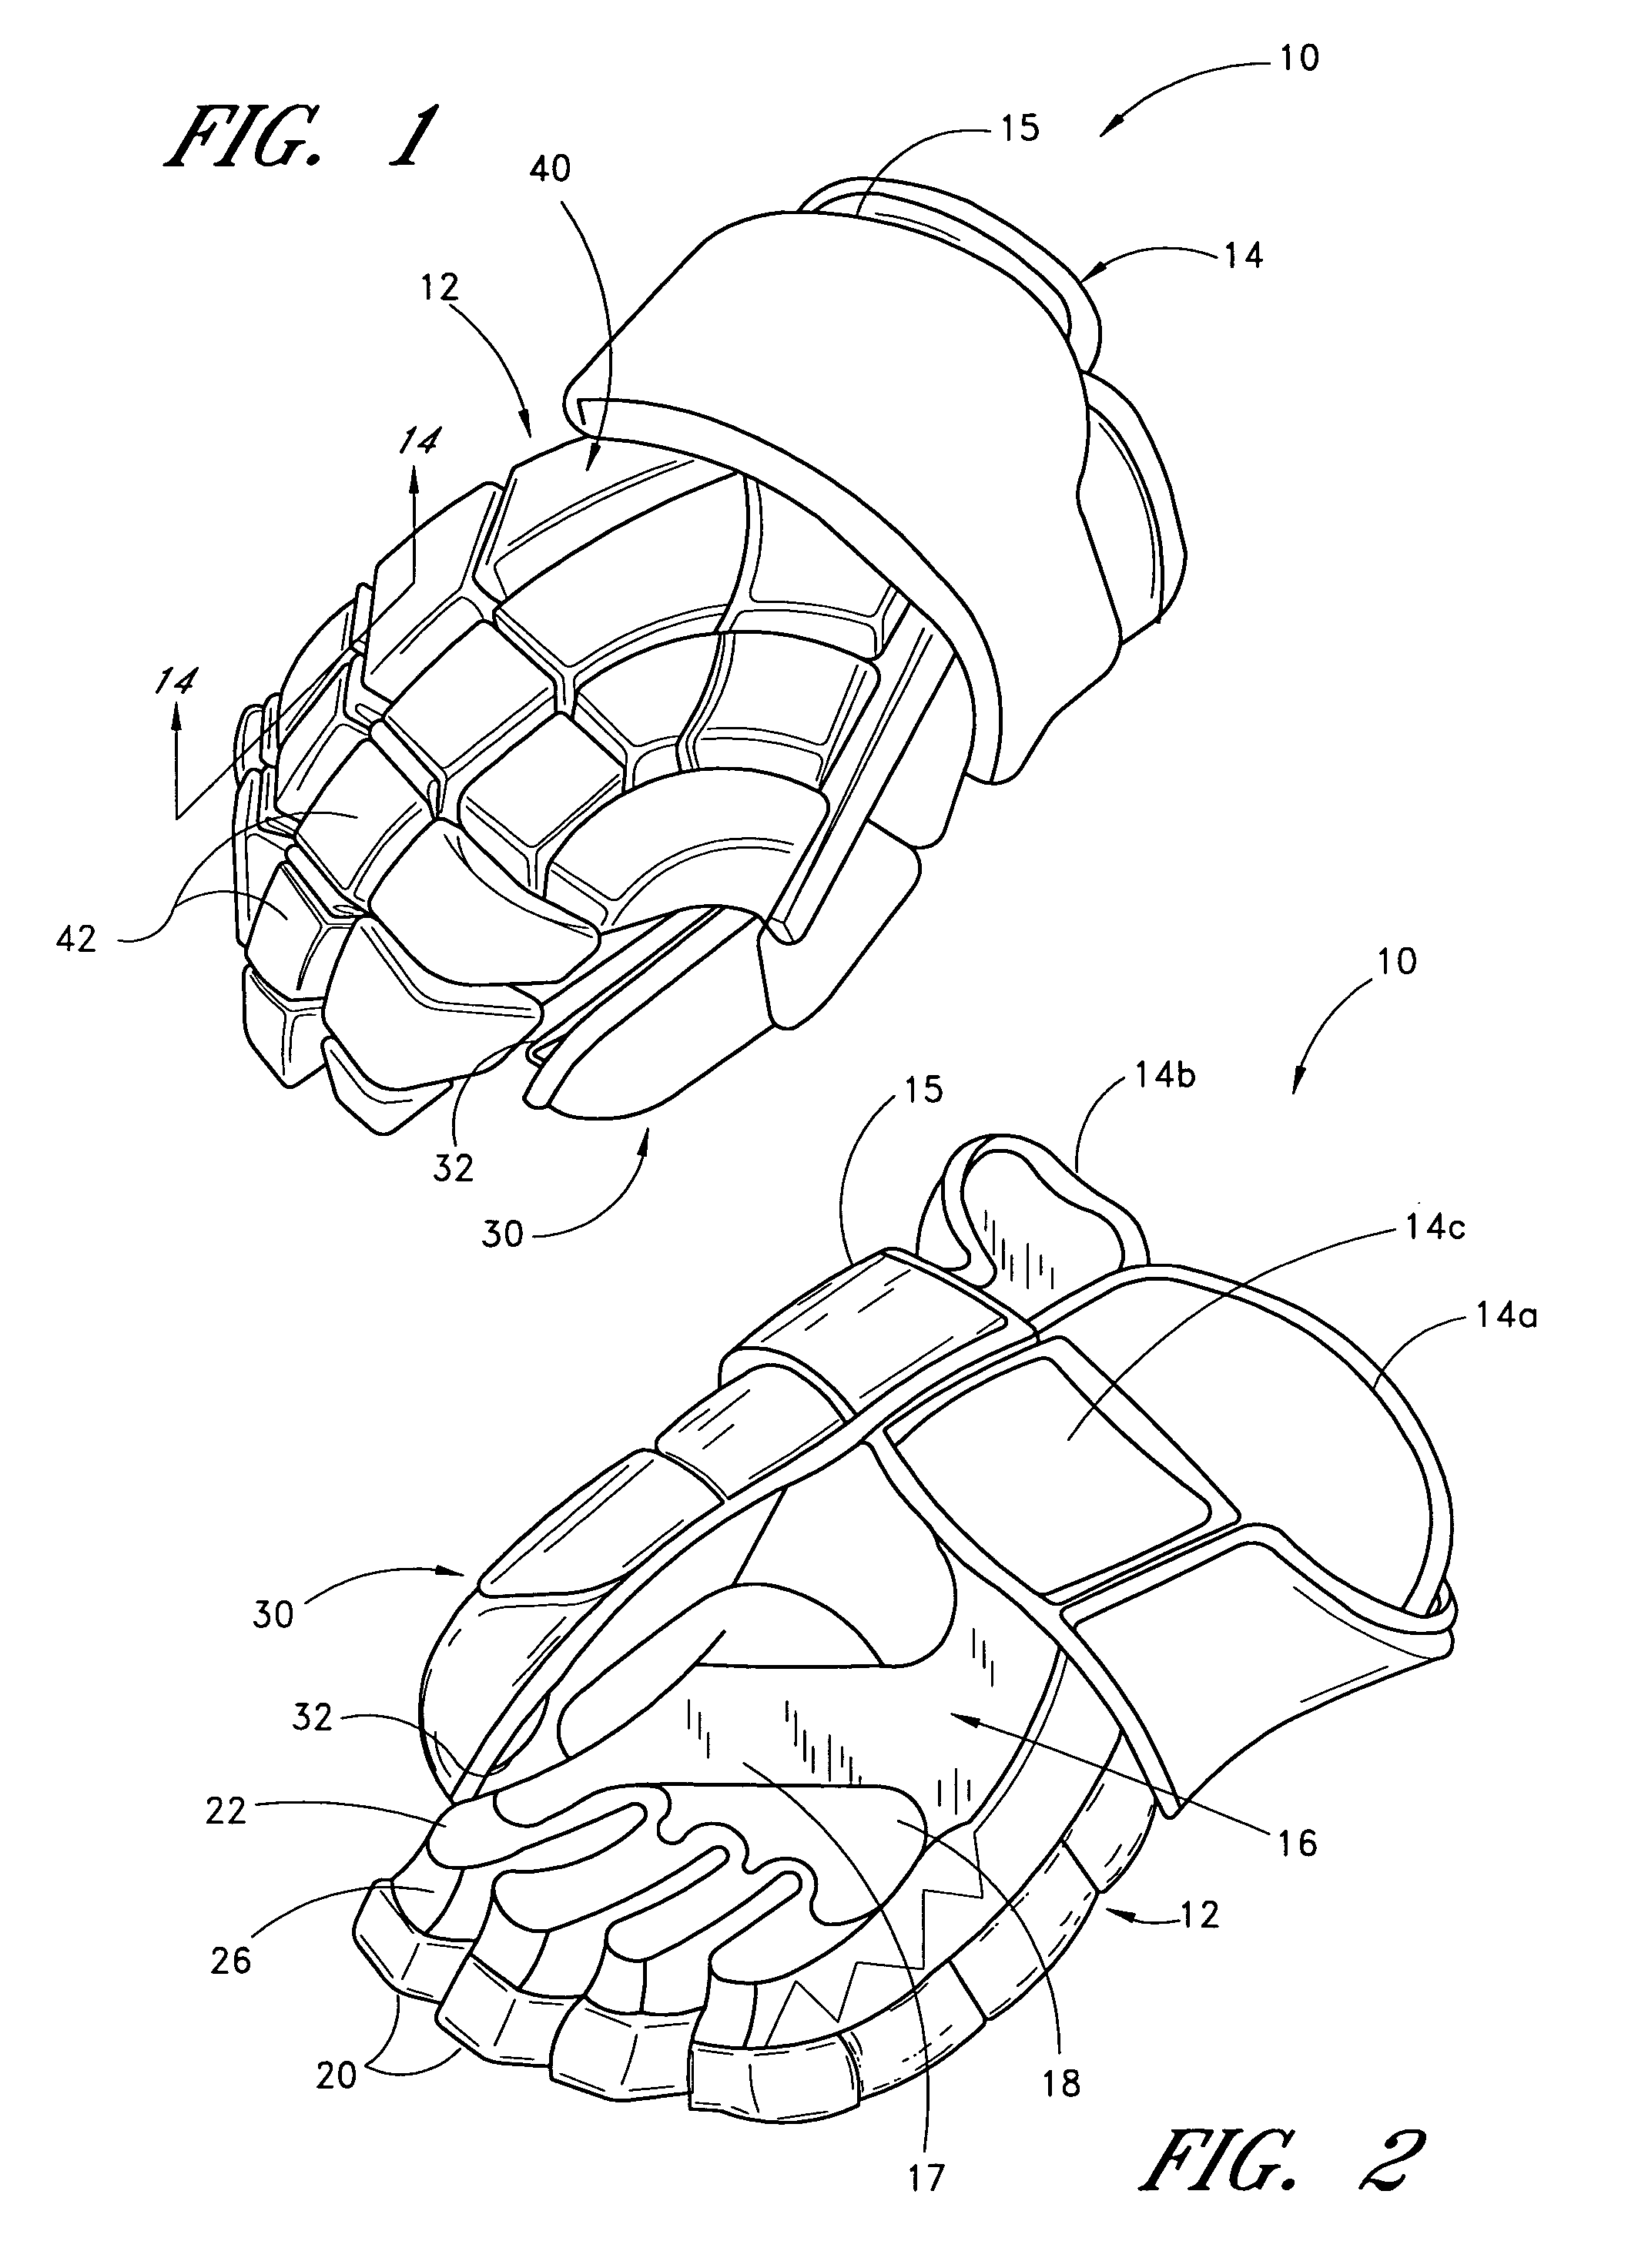 Protective glove with articulated locking thumb